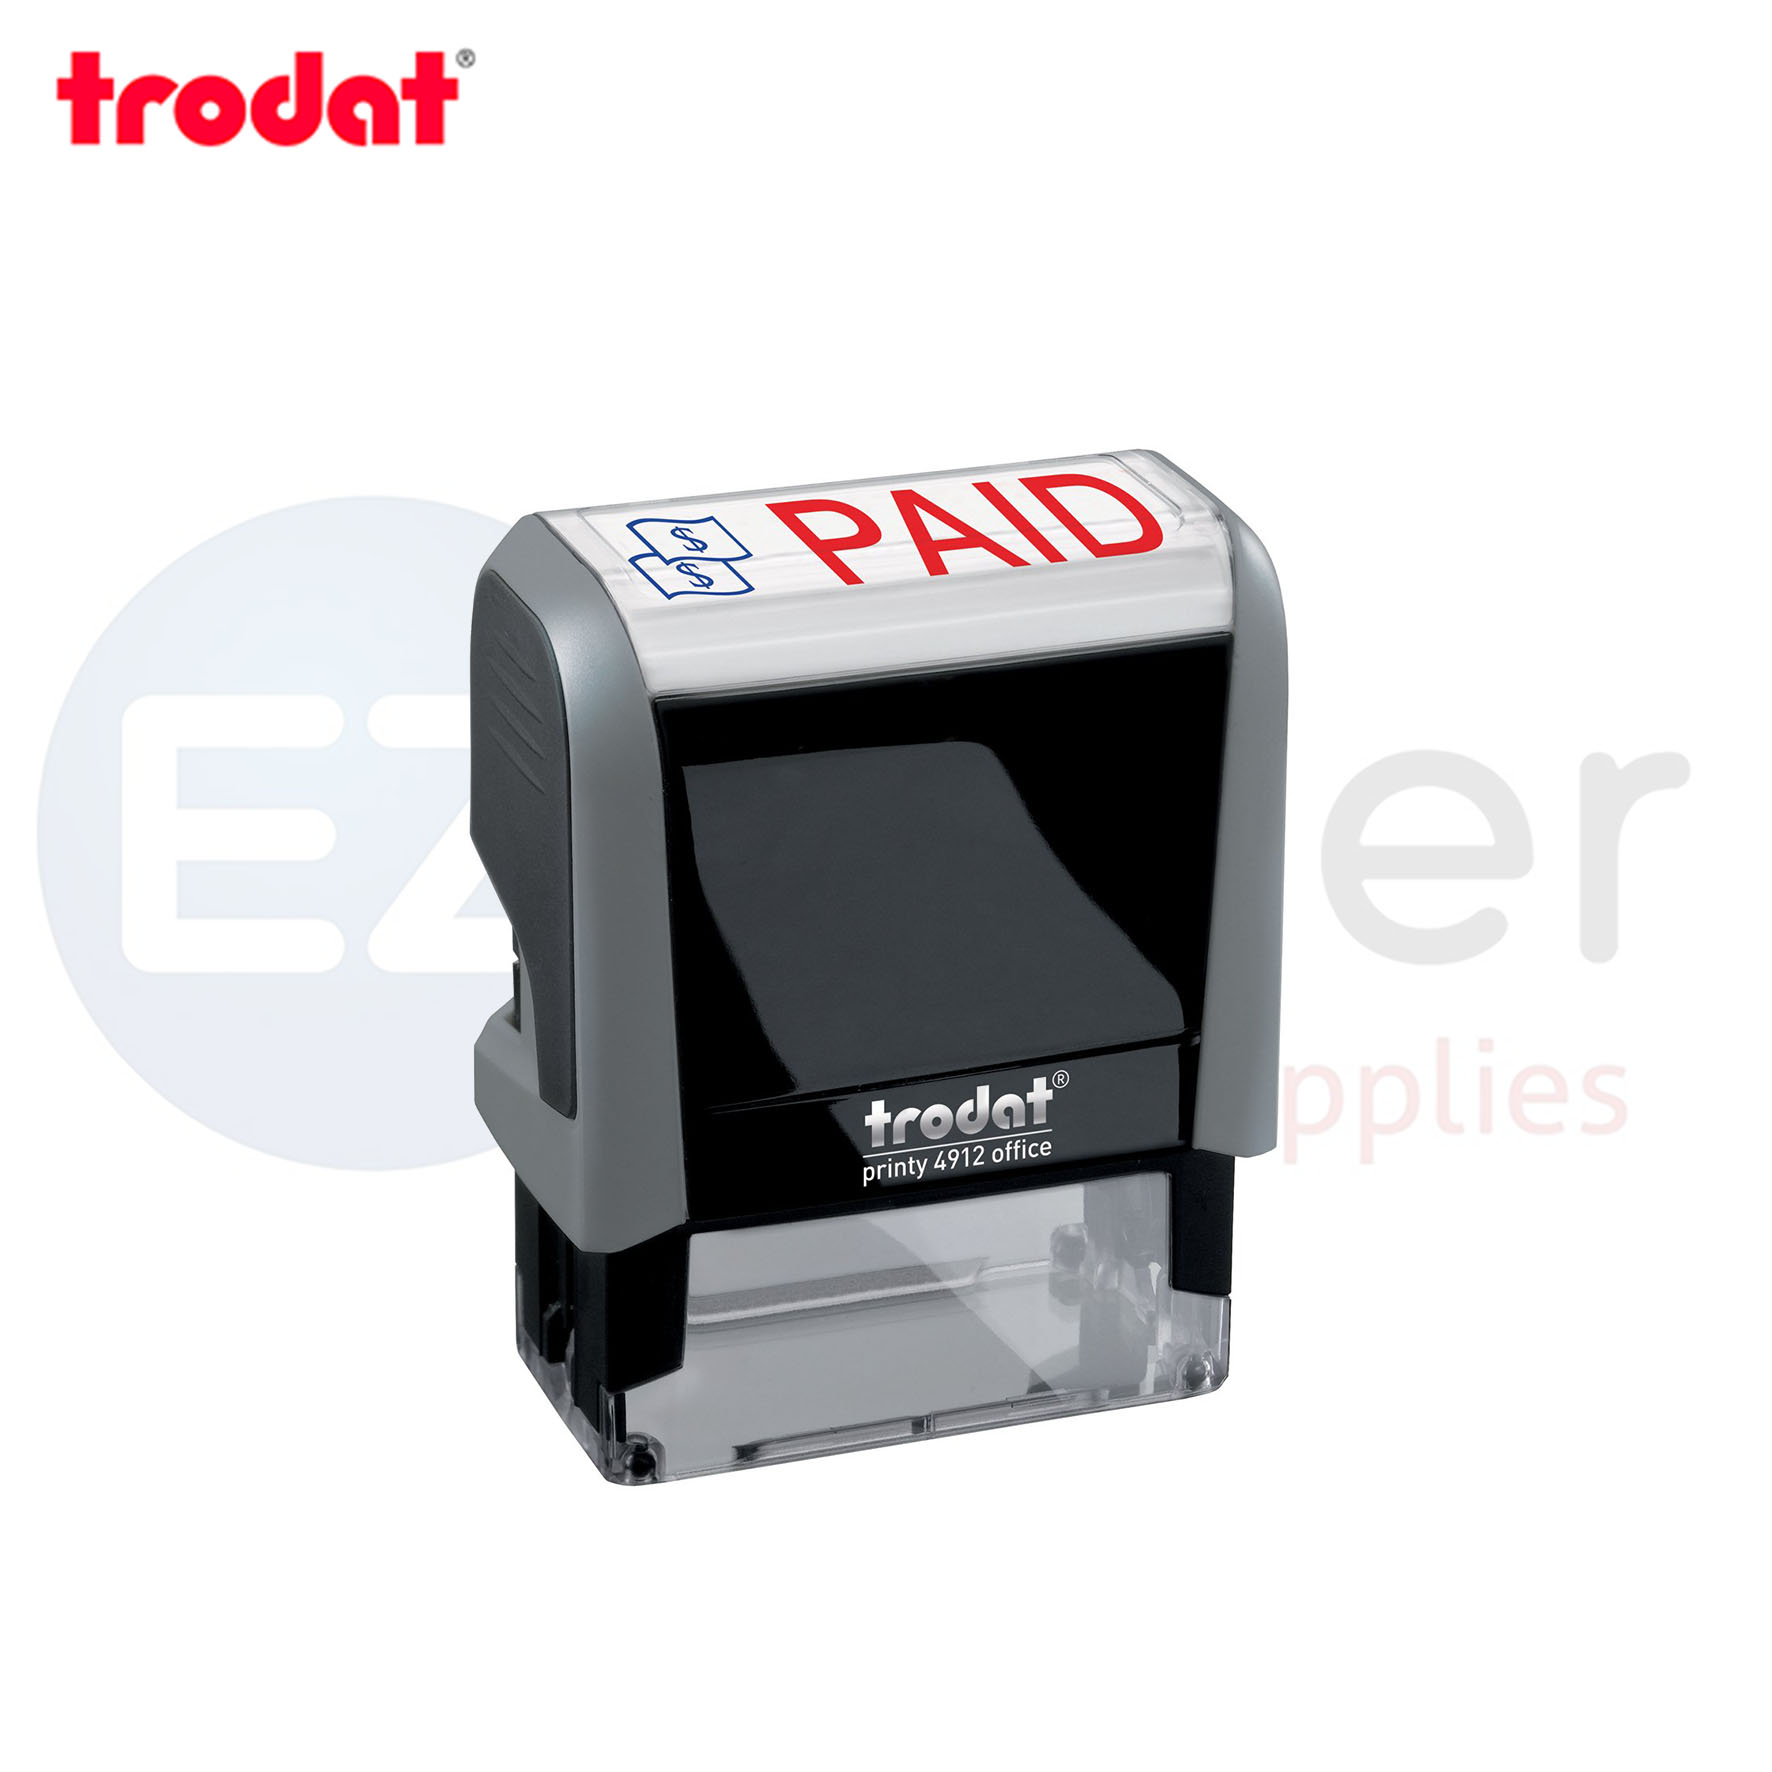 Rubber stamp  Trodat BAREE without &co